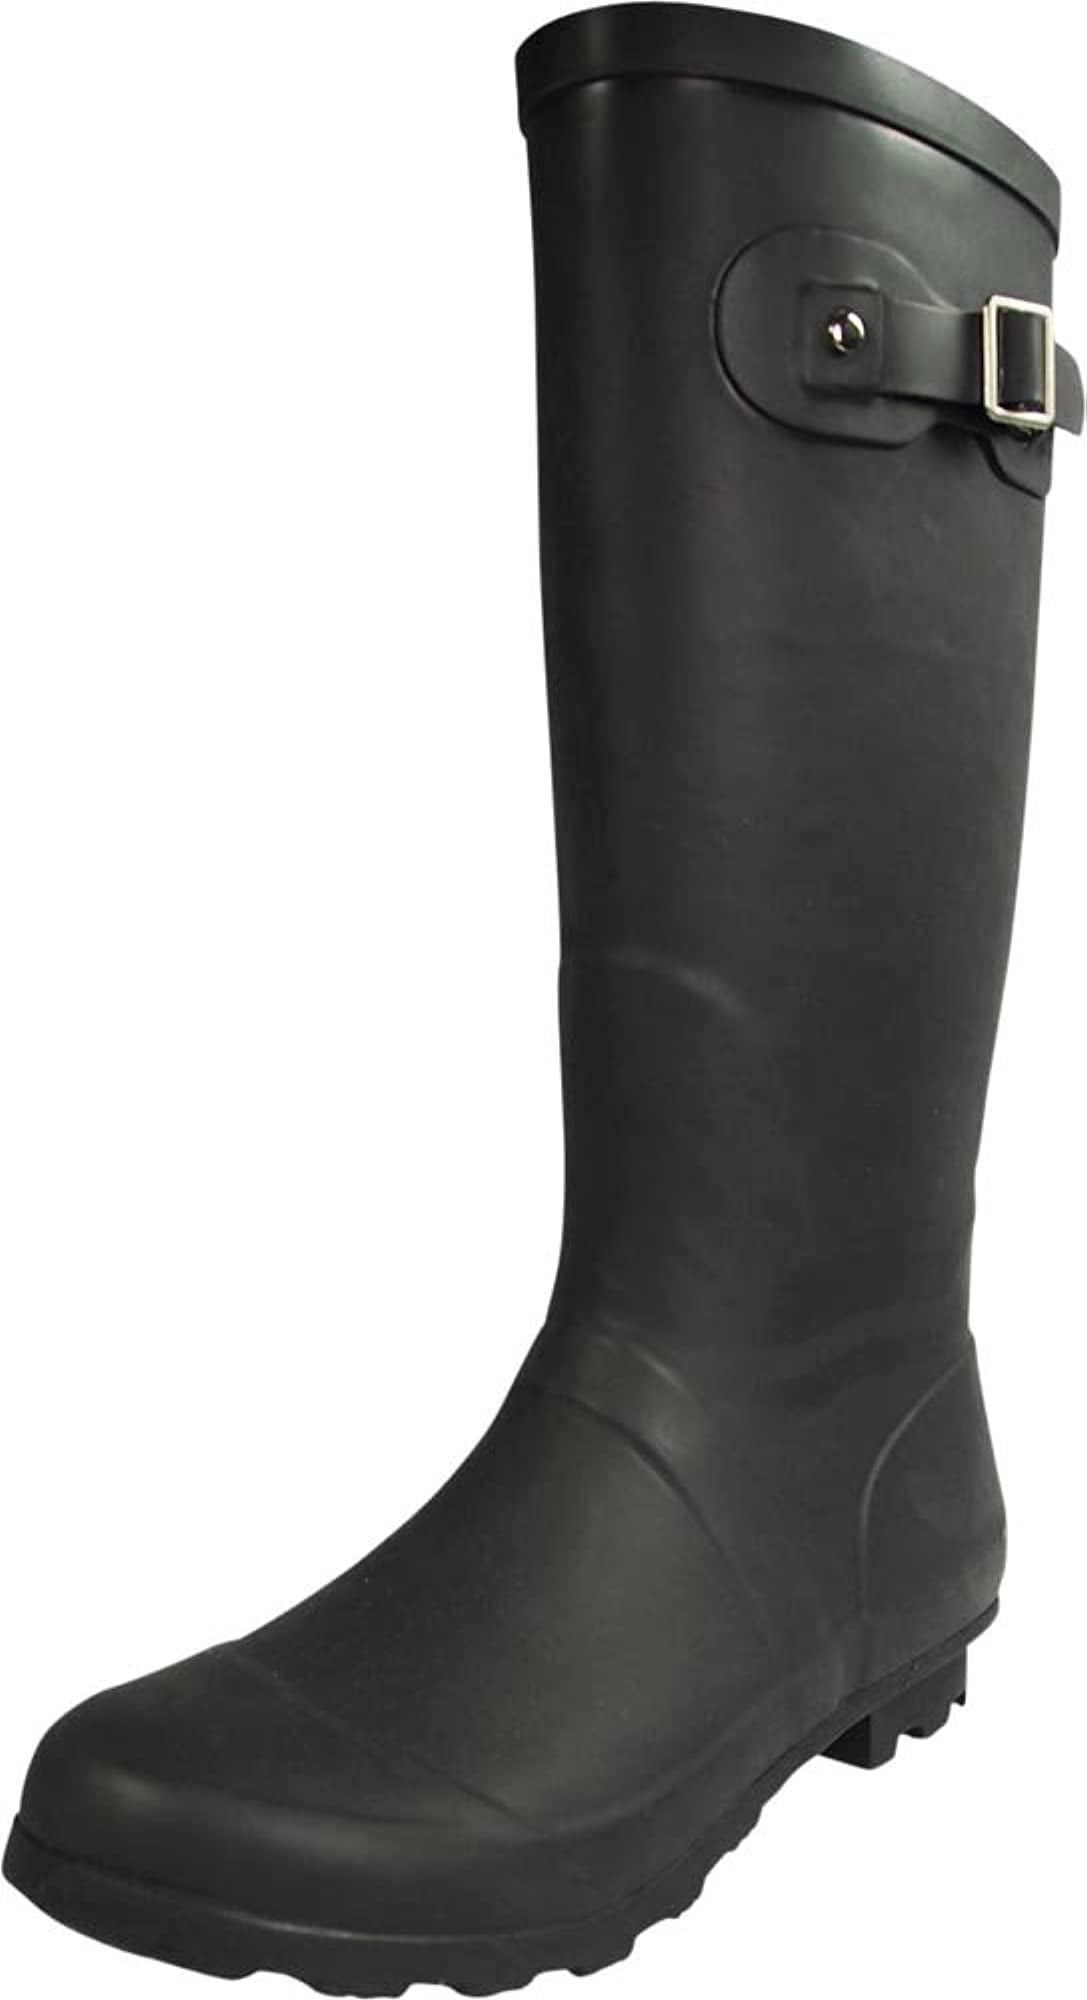 Glossy & Matte Waterp. 14 Solids and Prints Norty Womens Hurricane Wellie 